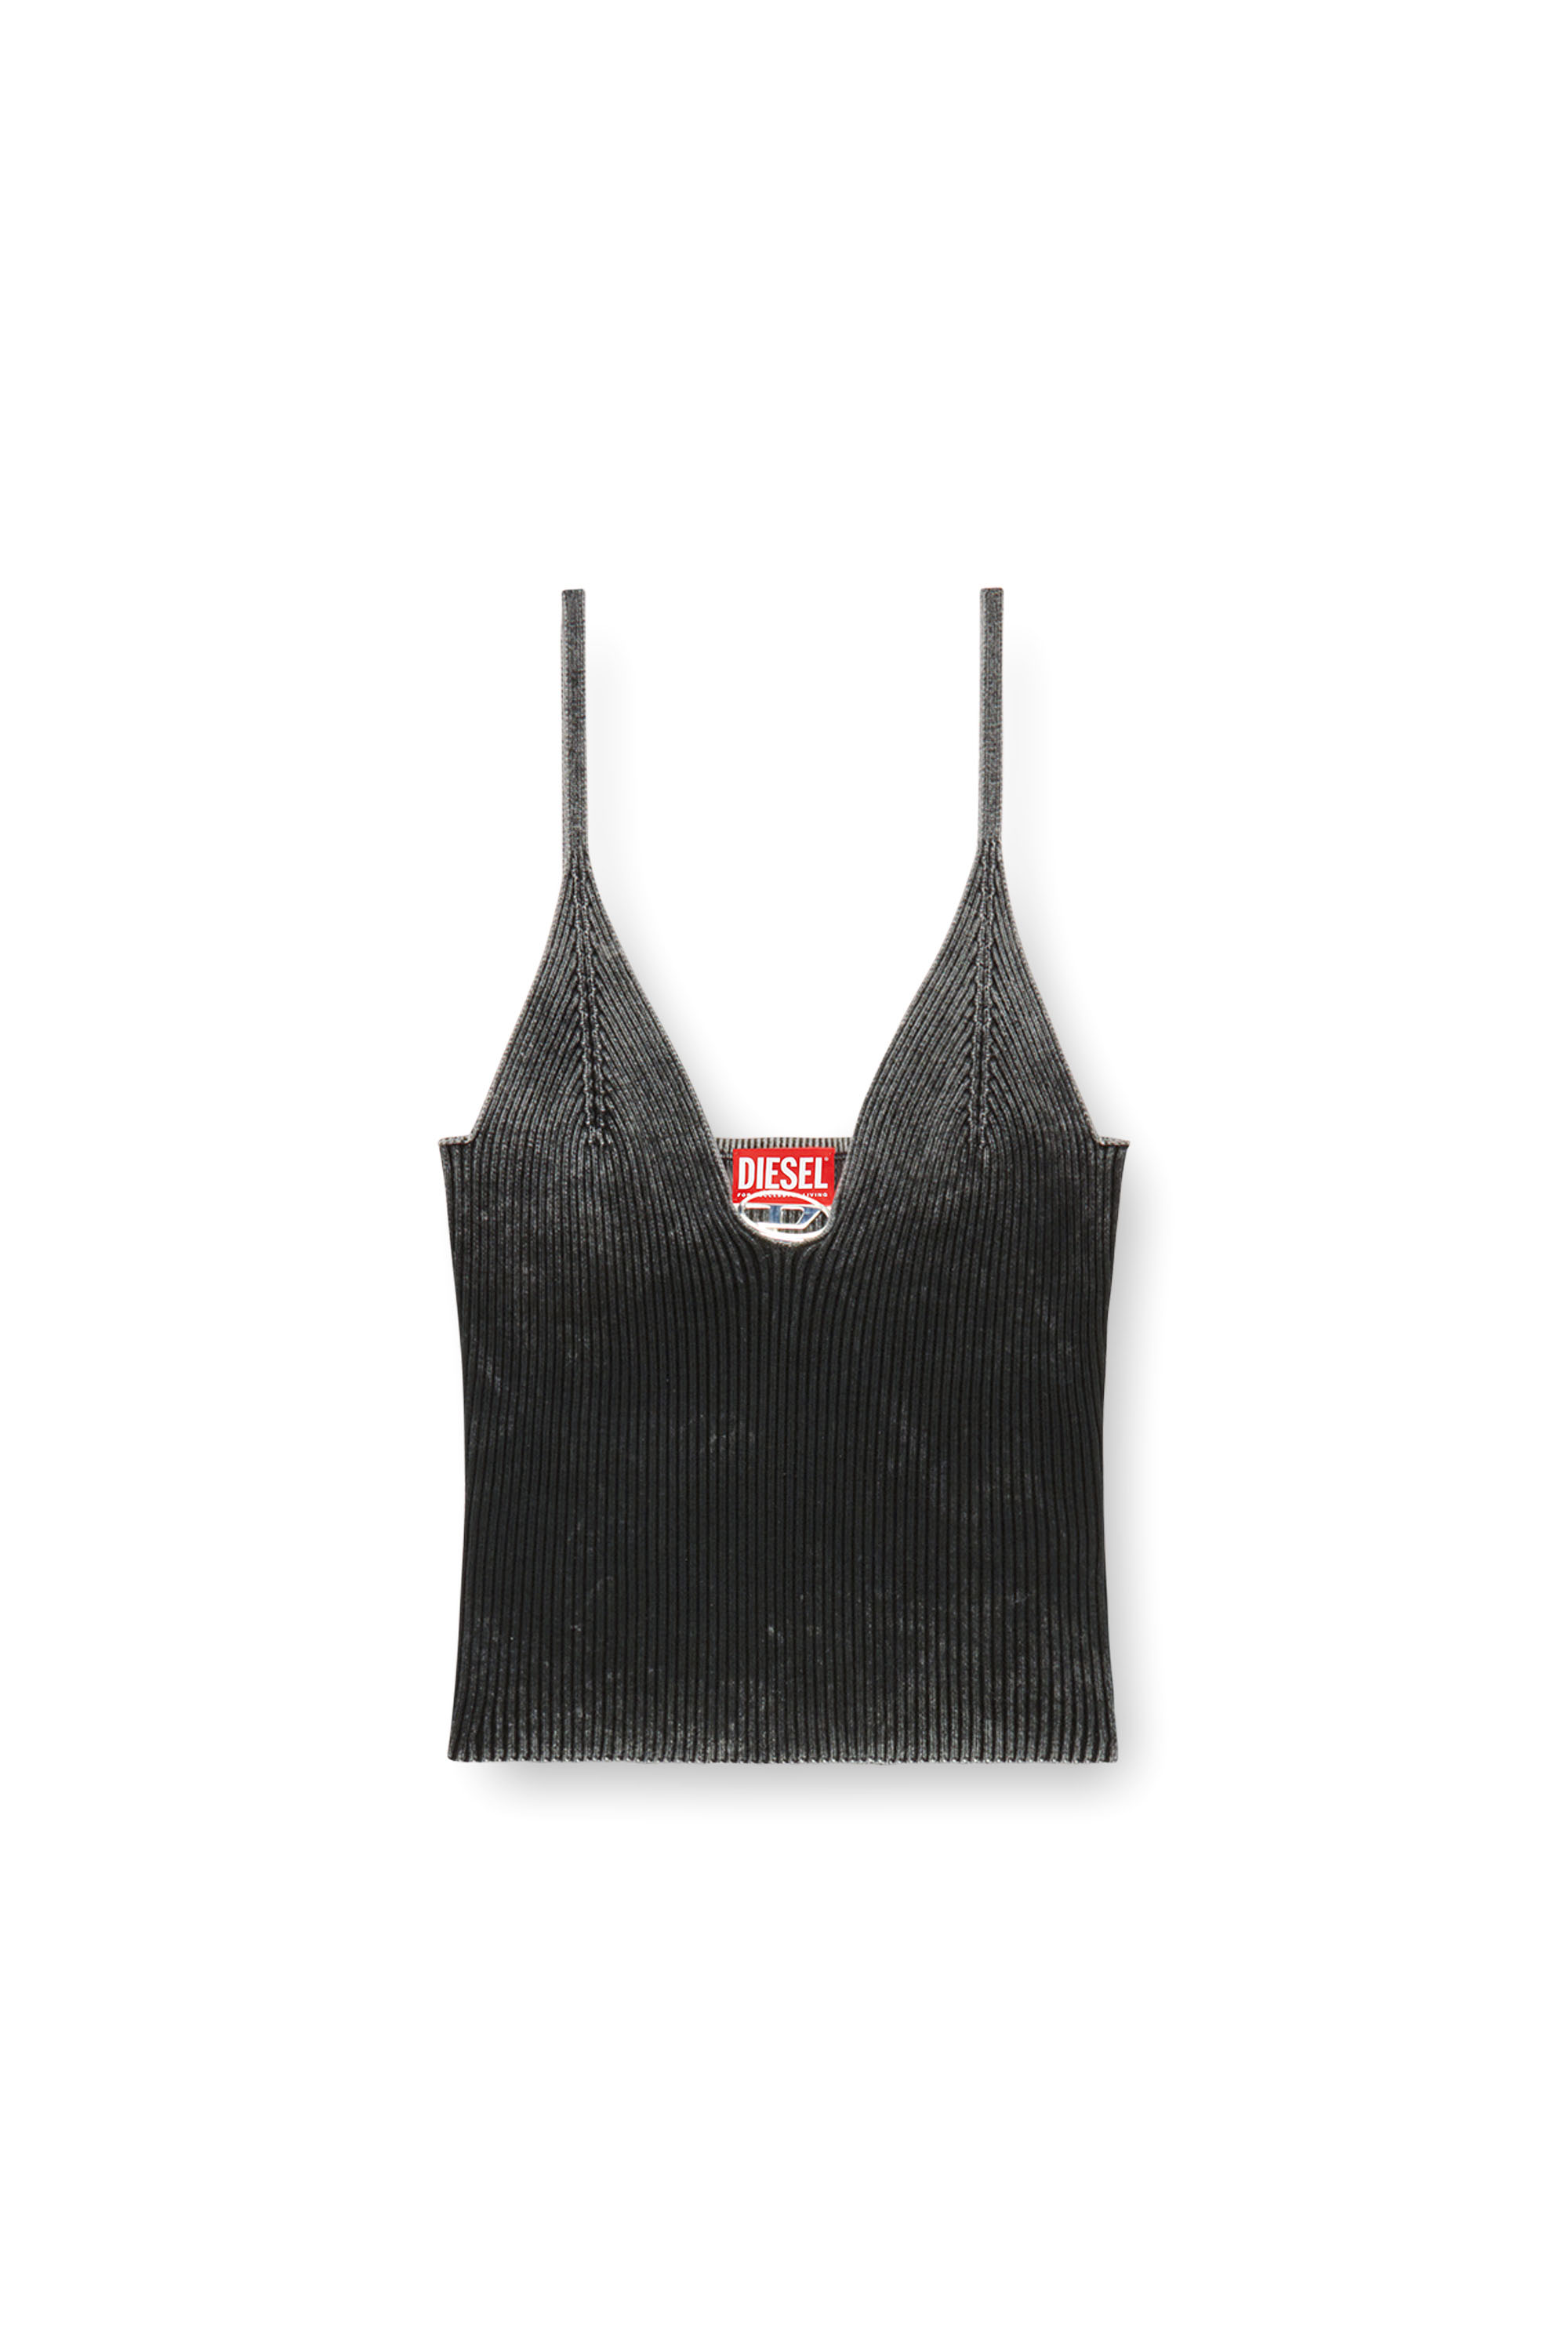 Diesel - M-LAILA, Woman Camisole in faded ribbed knit in Black - Image 5